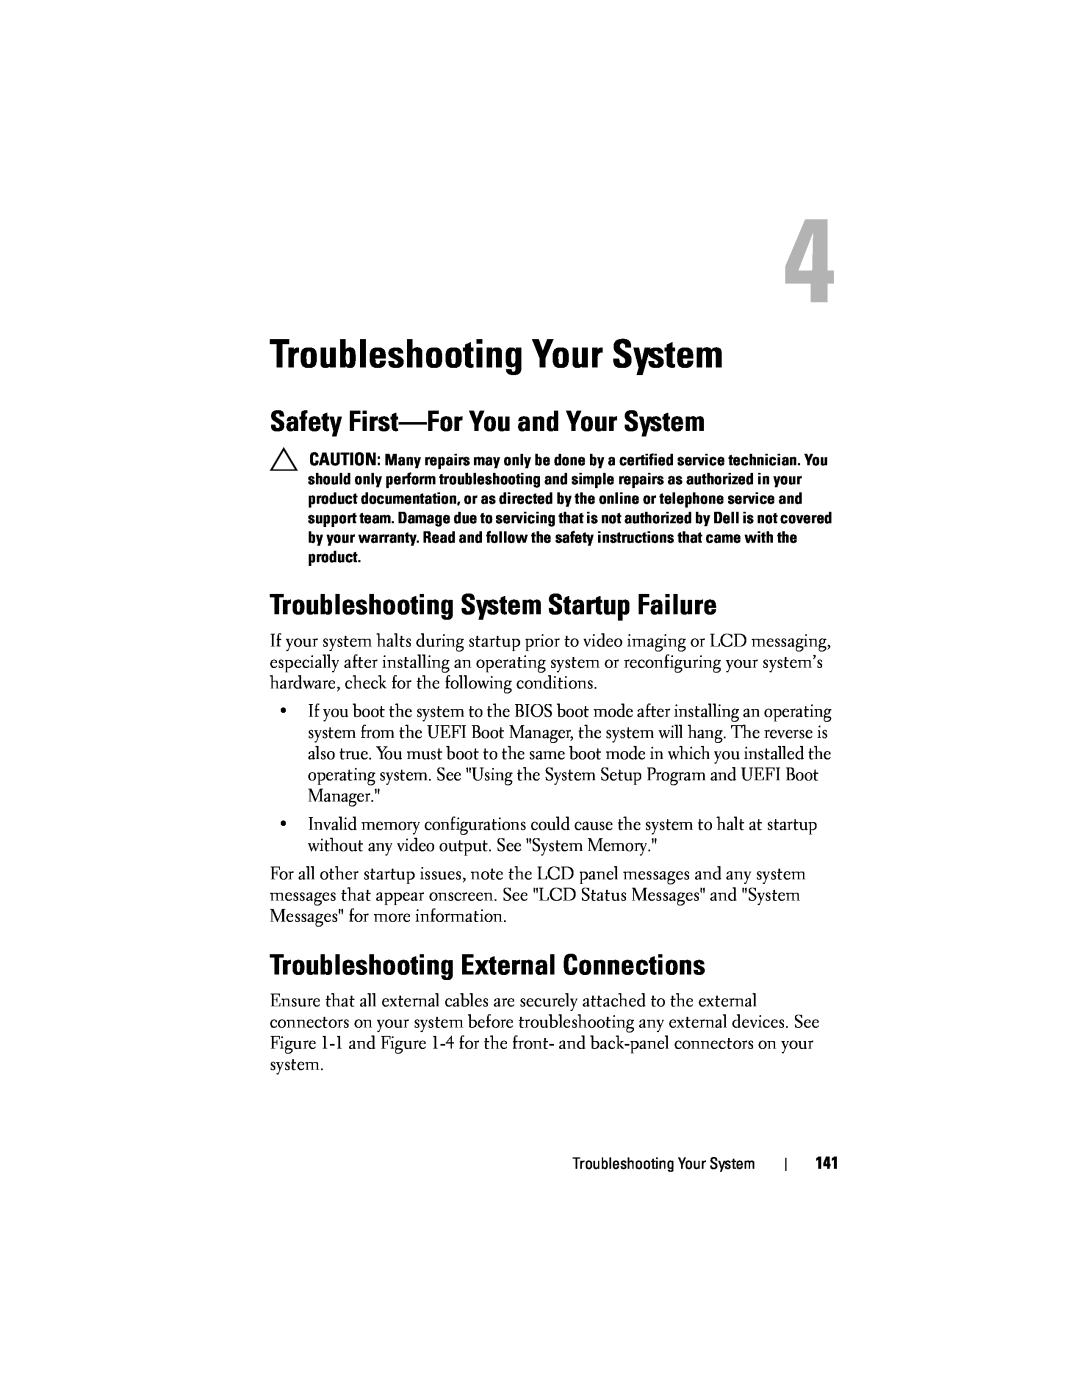 Dell R610 Troubleshooting Your System, Safety First-For You and Your System, Troubleshooting System Startup Failure 